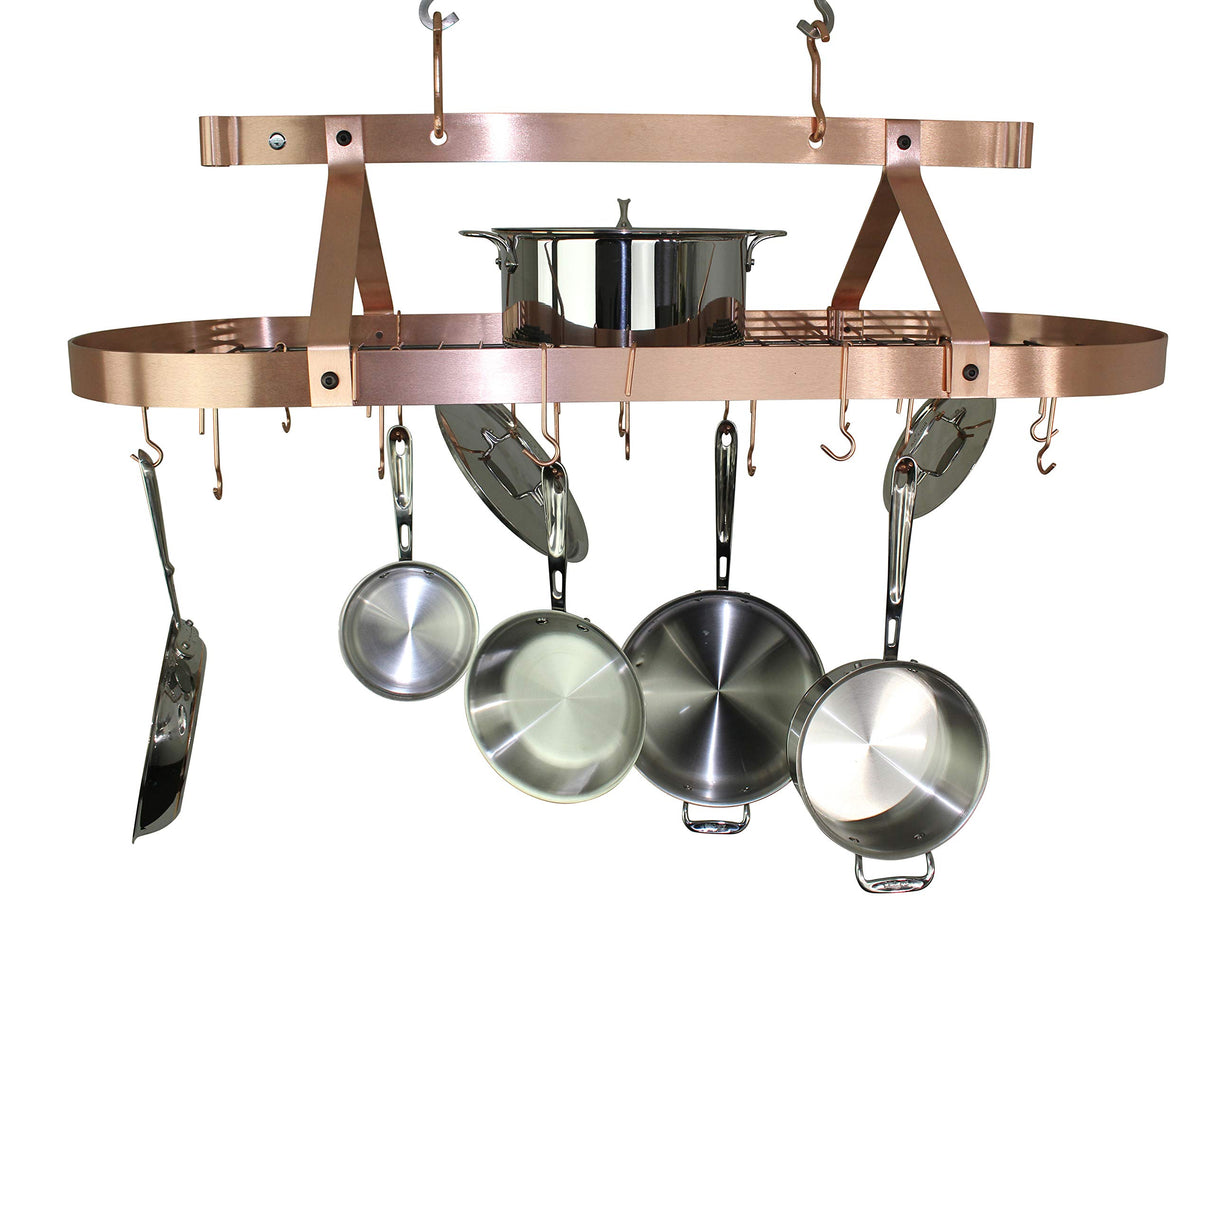 Enclume PR16CWG SCP 48" Oval Ceiling Pot Rack w/ 24 Hooks SCP